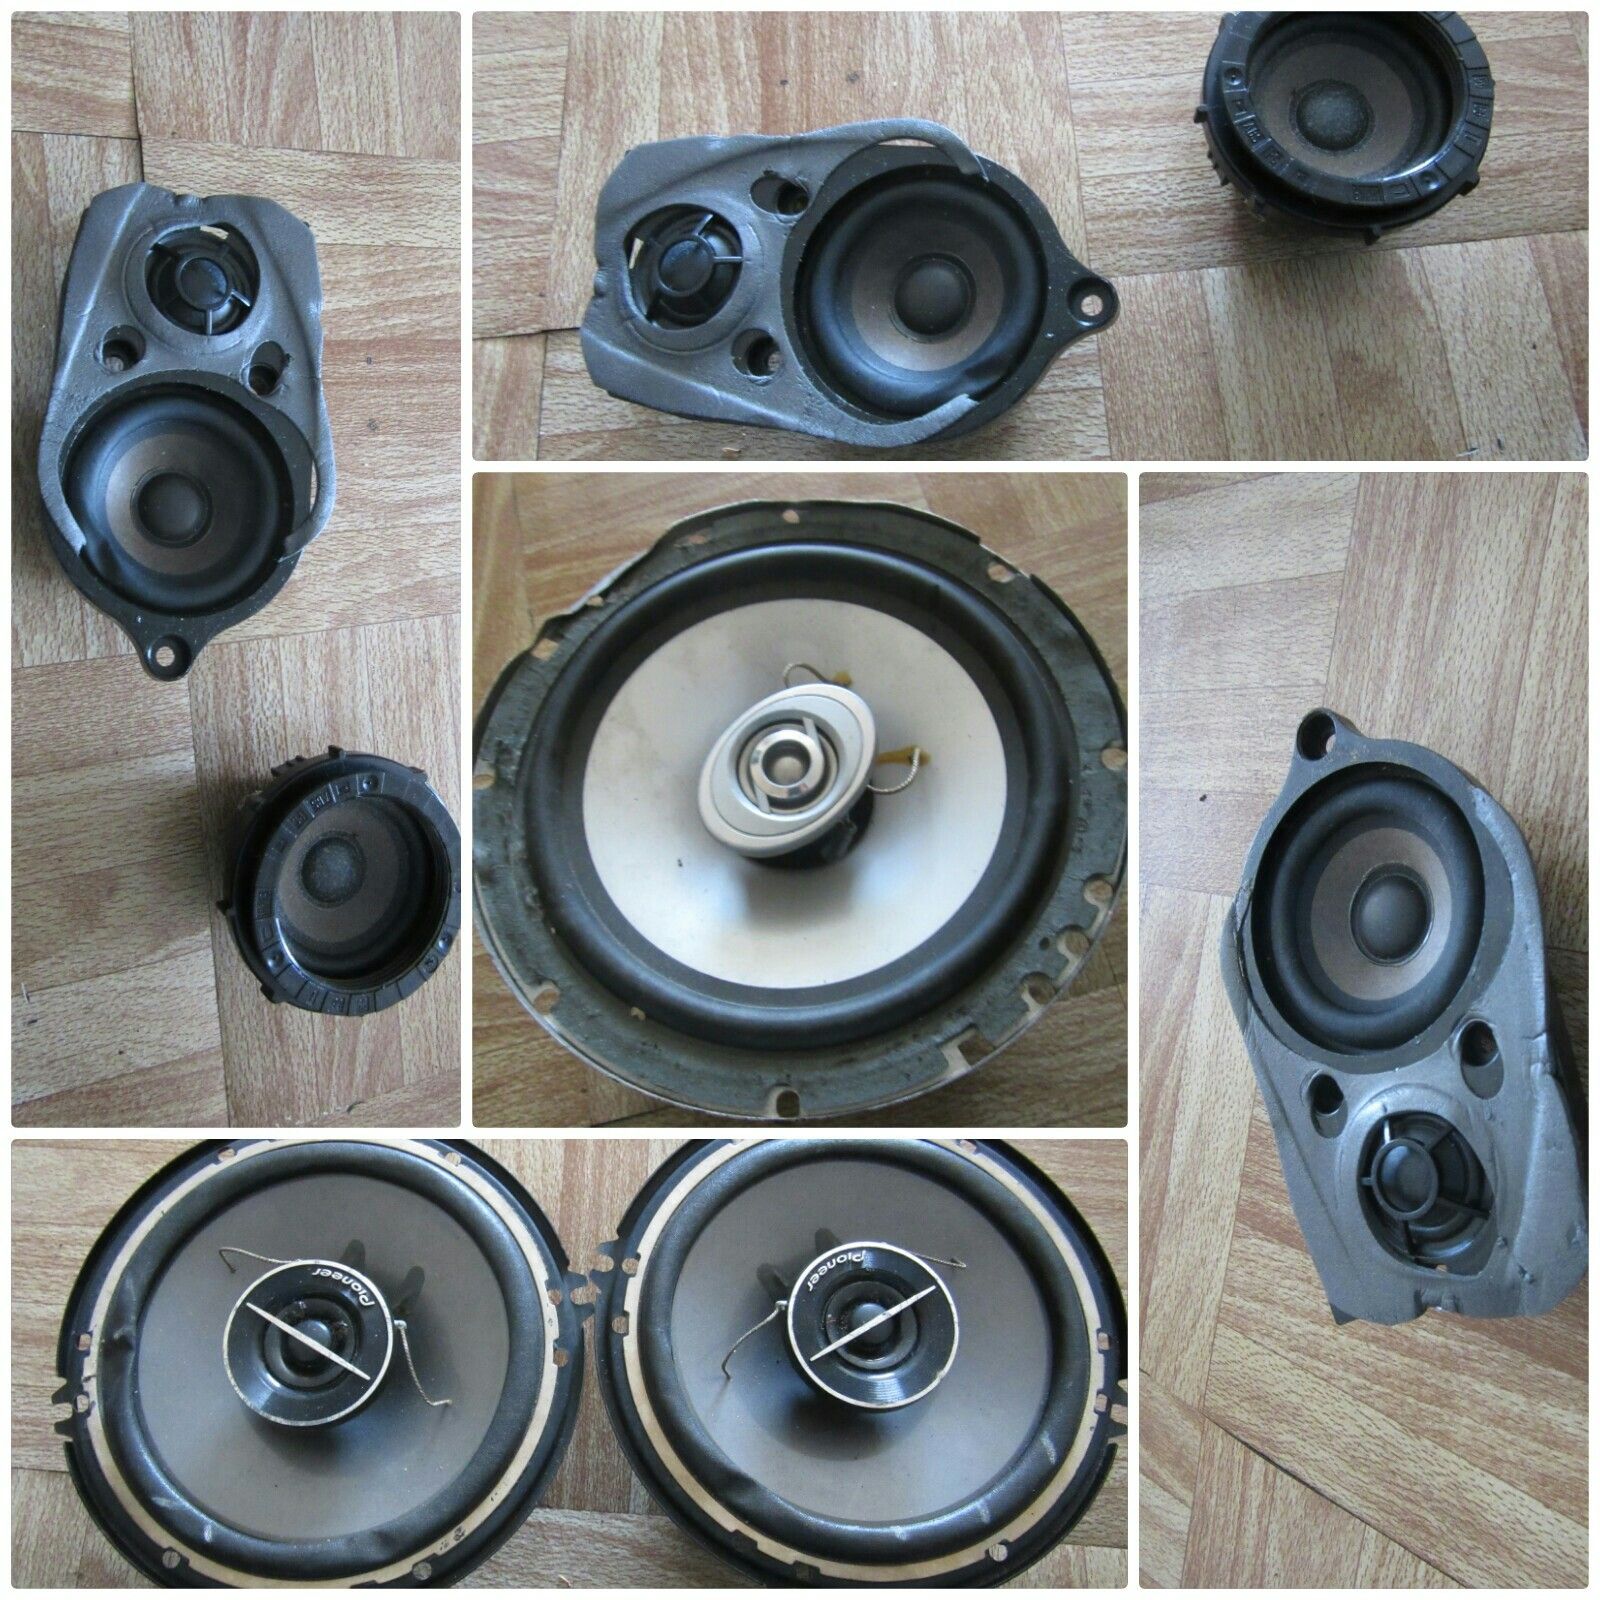 Bmw e46 parts for sale (price vary)